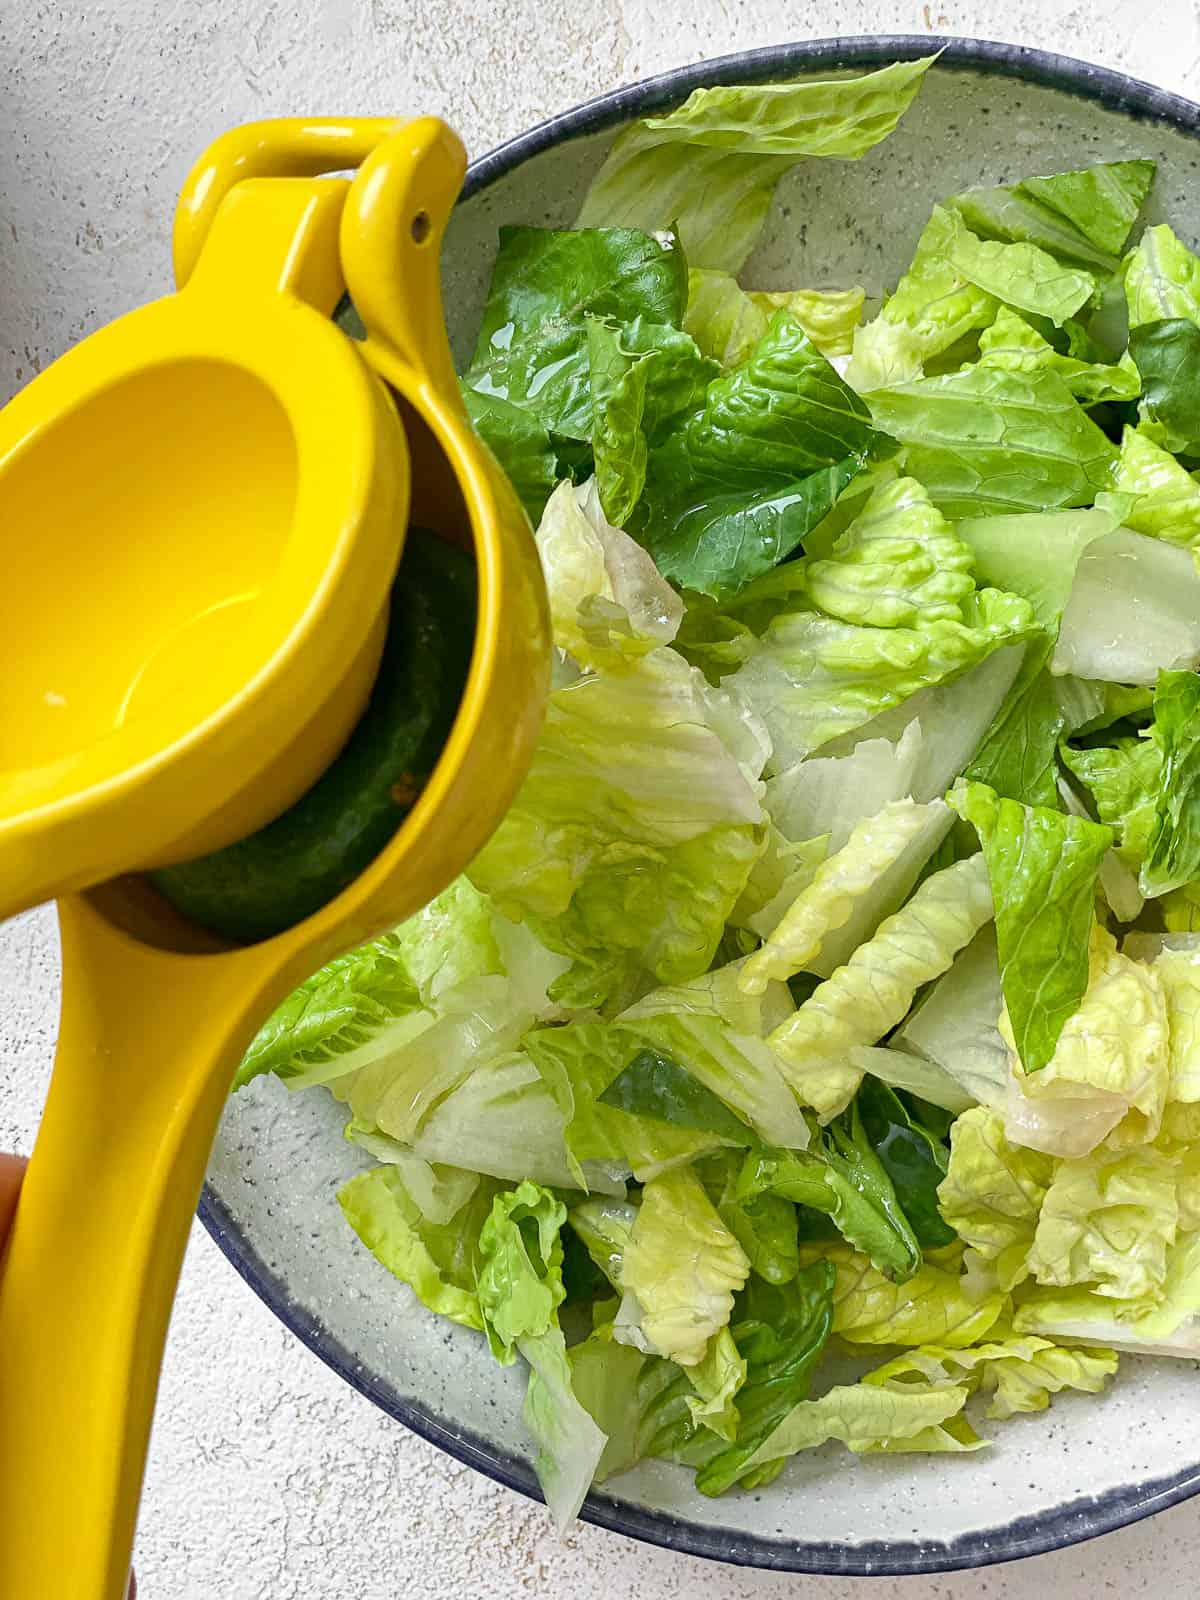 A white bowl with a blue rim filled with chopped romaine. There's a yellow citrus squeezer squeezing lime into the bowl.